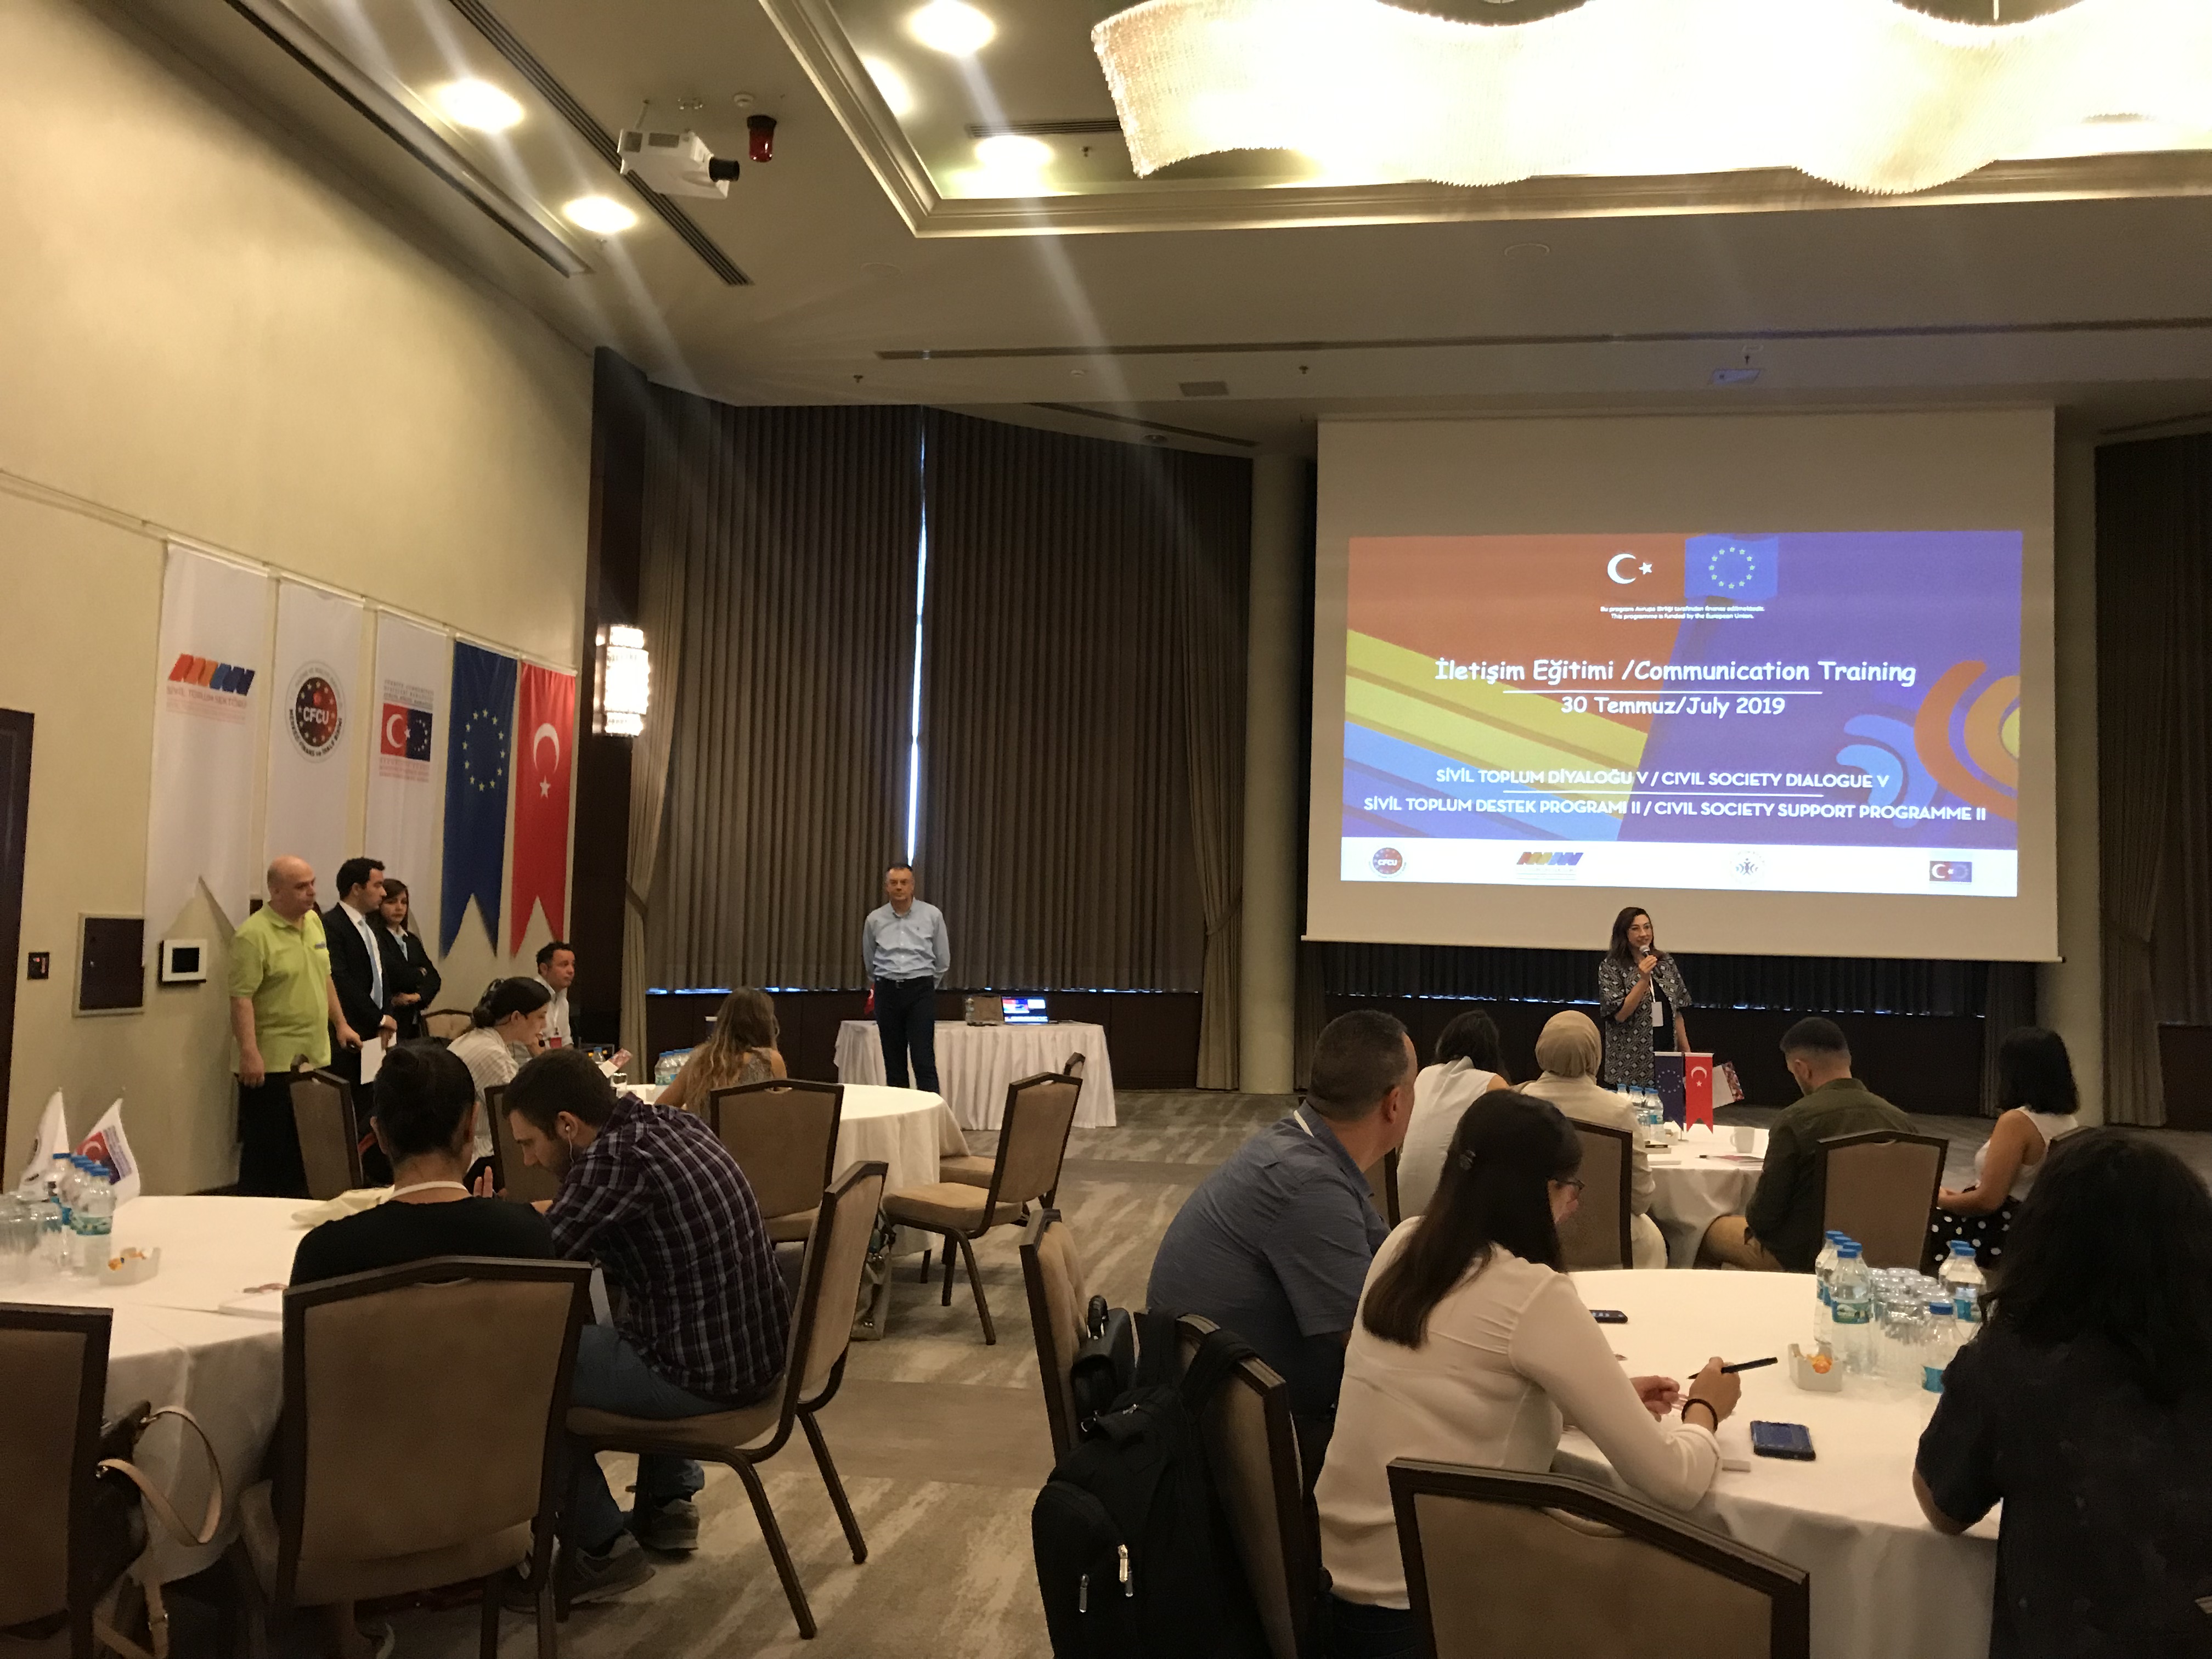 <span  class="uc_style_uc_tiles_grid_image_elementor_uc_items_attribute_title" style="color:#ffffff;">On 29 July 2019, we participated in the Civil Society Support Program Third Term Information Meeting held by the Civil Society Sector in Ankara.</span>